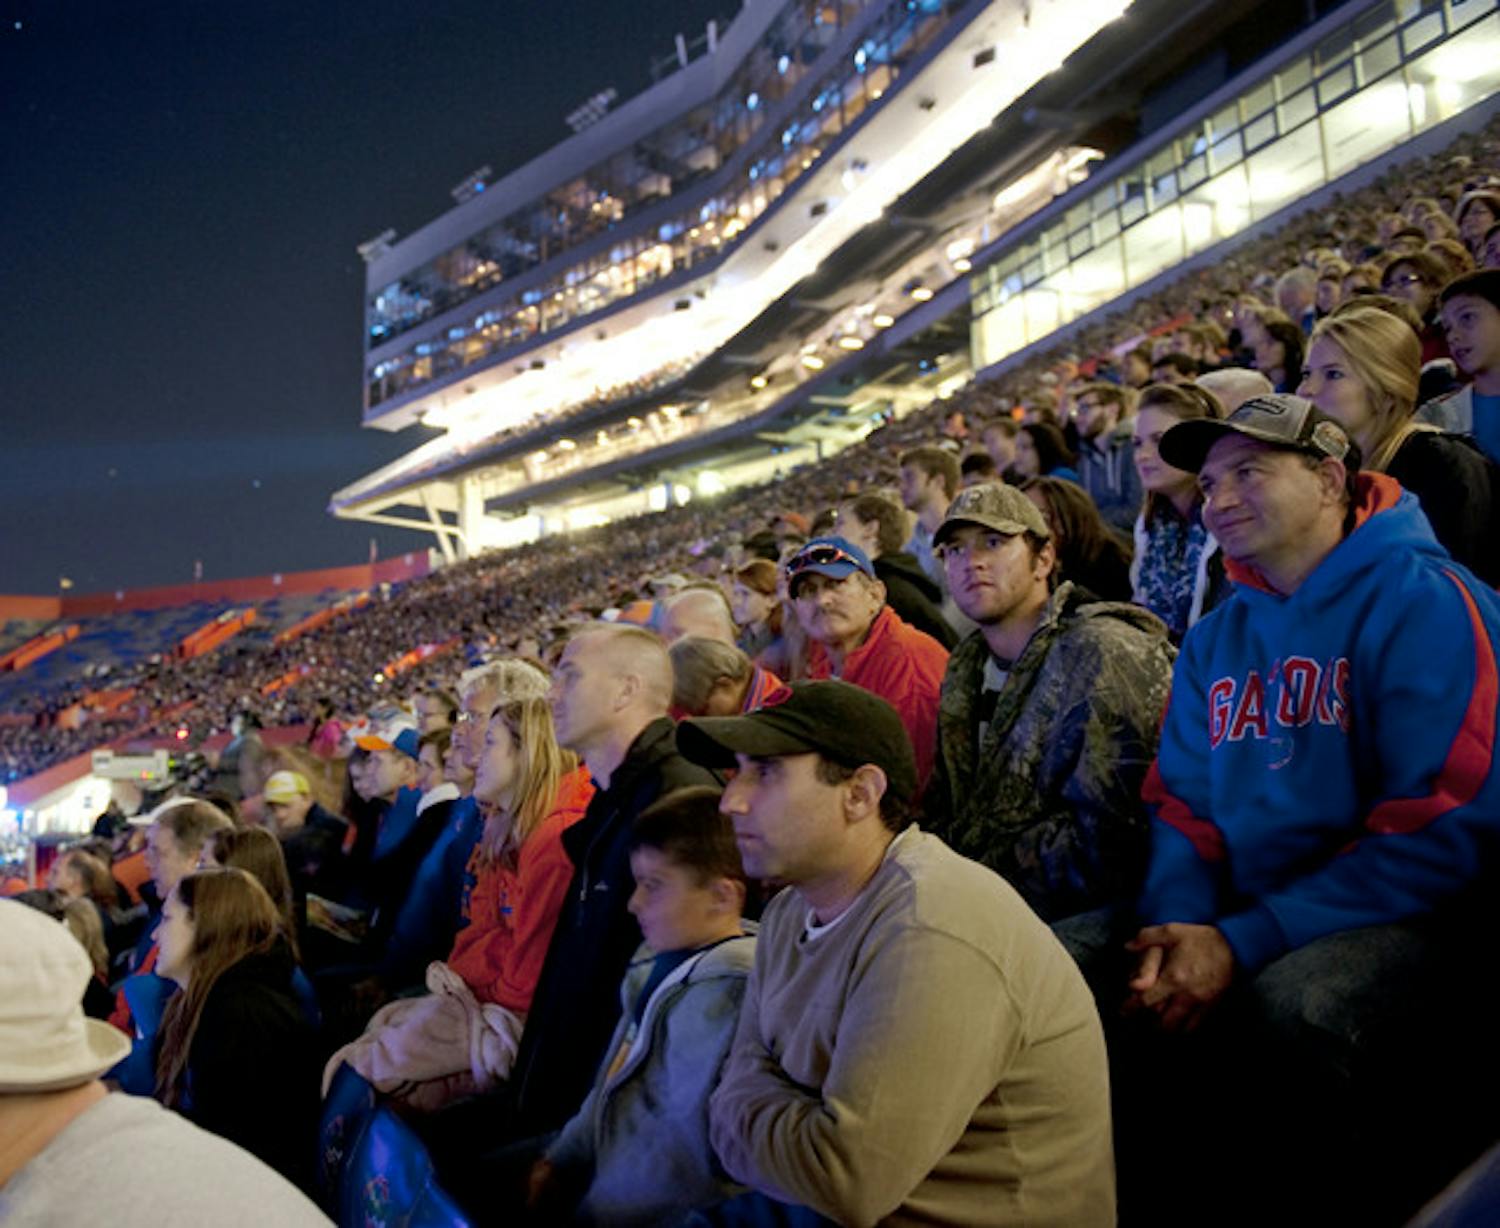 About 26,000 people attended Gator Growl on Friday night, said Gator Growl Producer Aaron Heger.